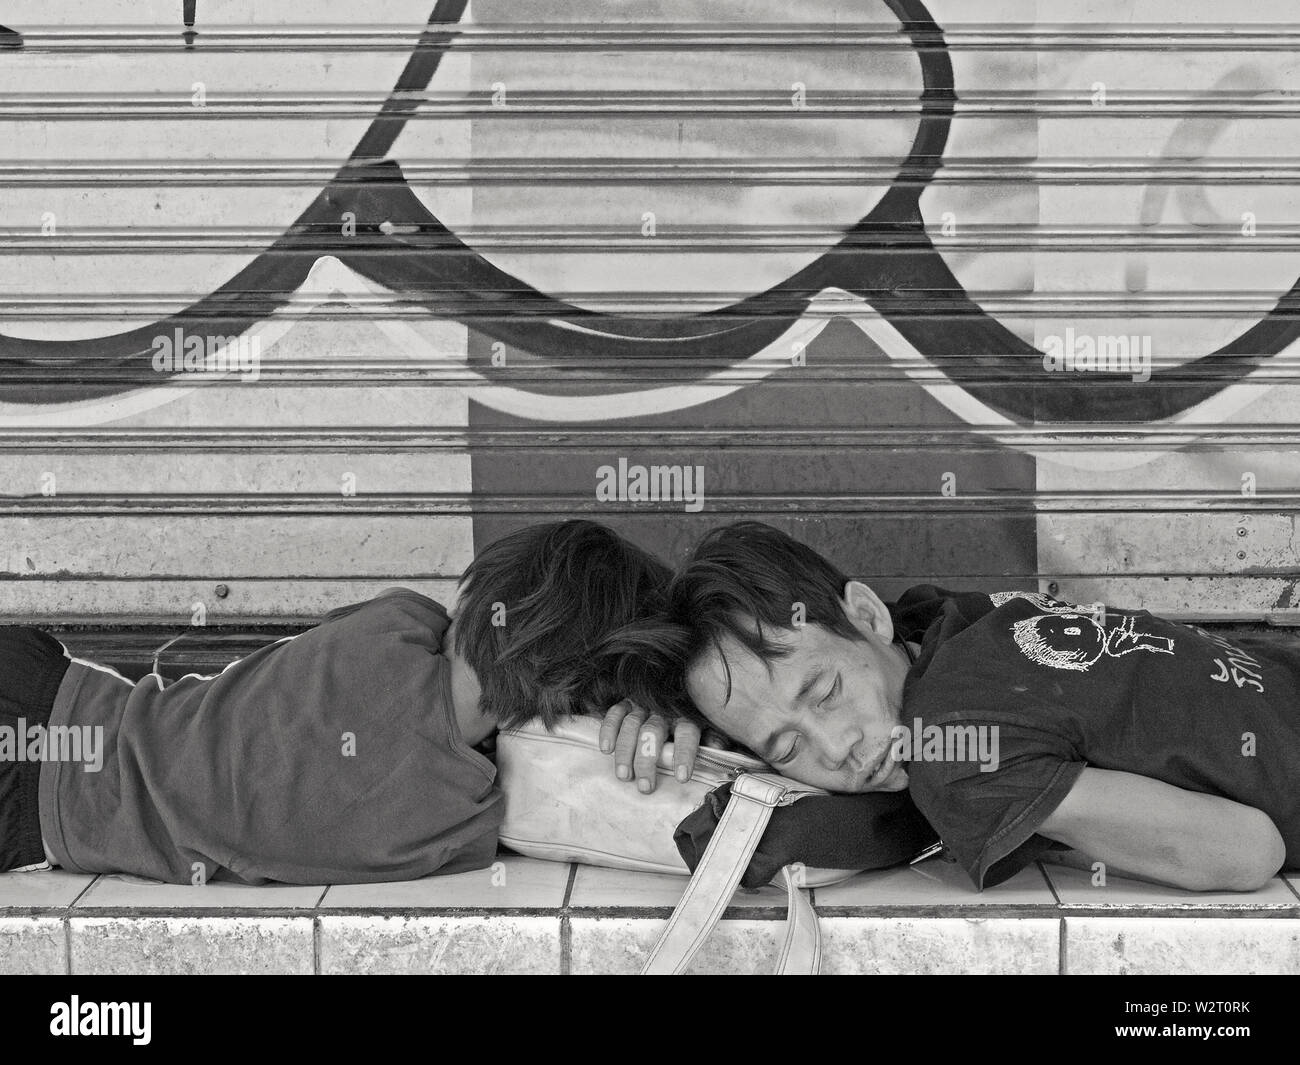 bangkok, thailand - november 06, 2009: two obviously homeless young men sleping in front of shop shutter at the roadside of  thanon phayatha Stock Photo